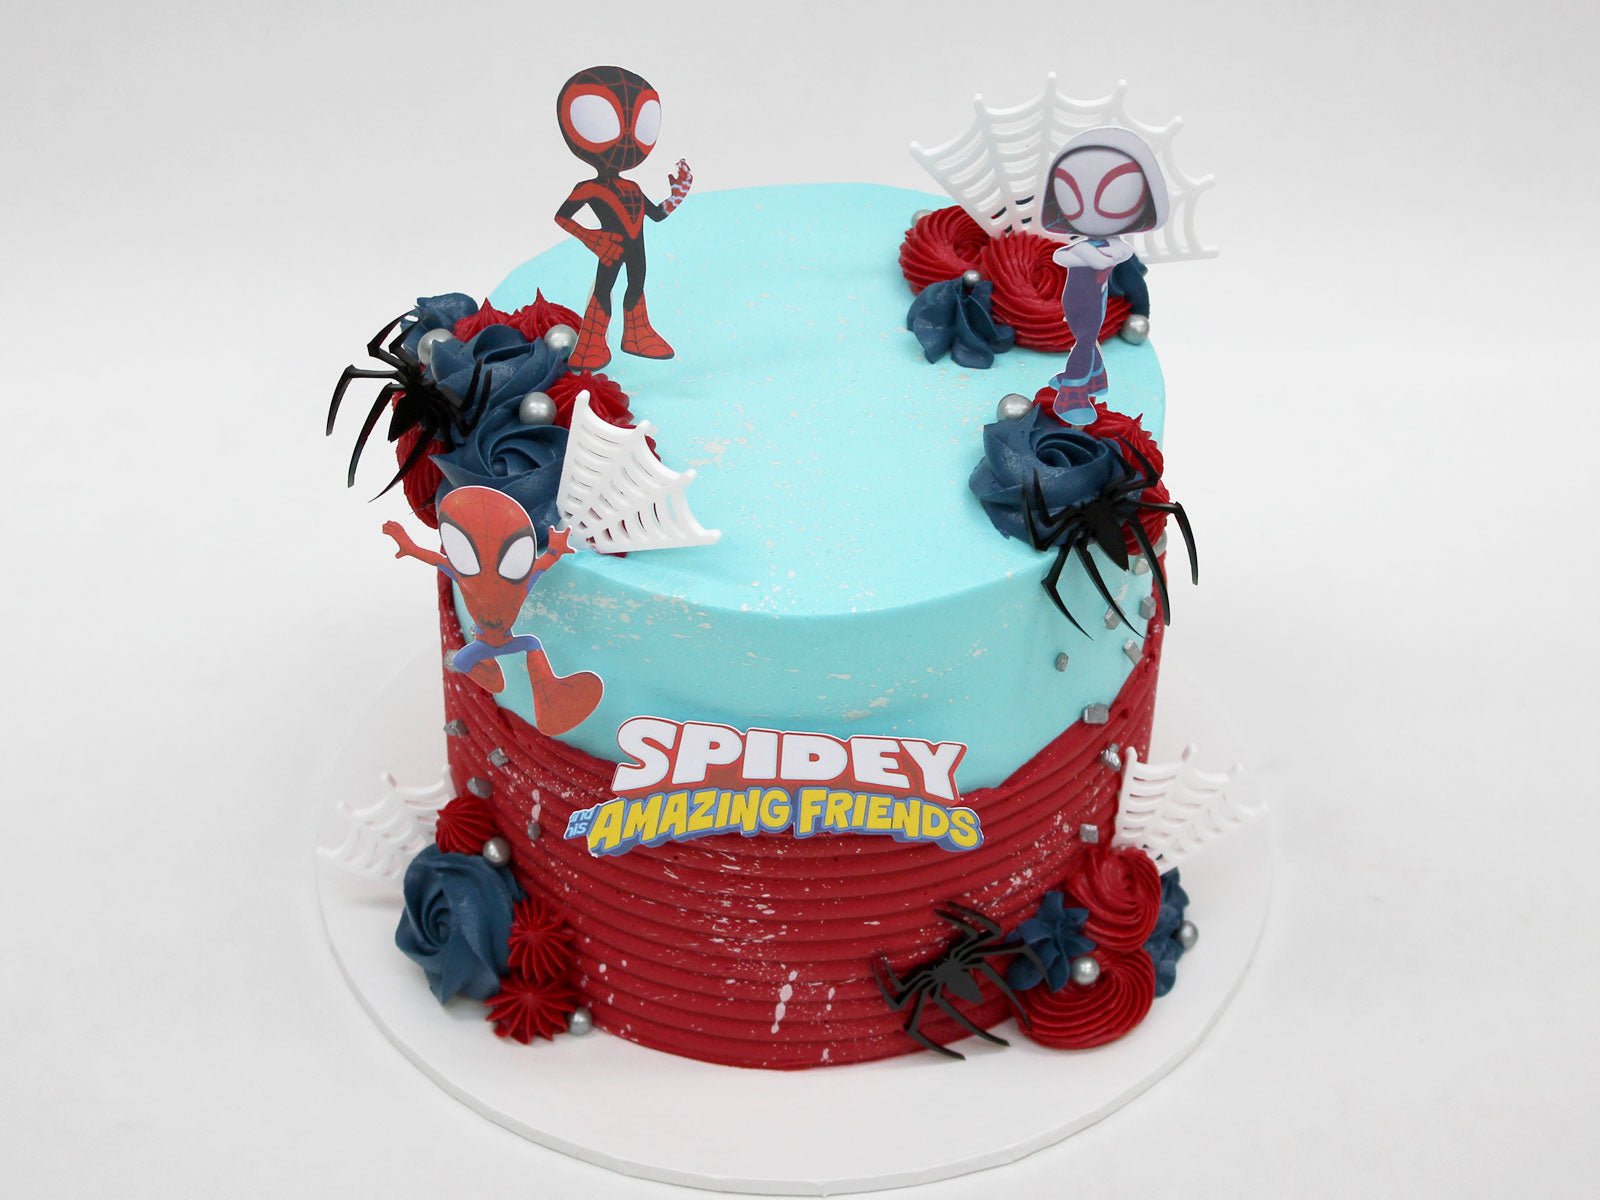 Spiderman Games, Decor and More! | Snickerplum's Party Blog | Snickerplum